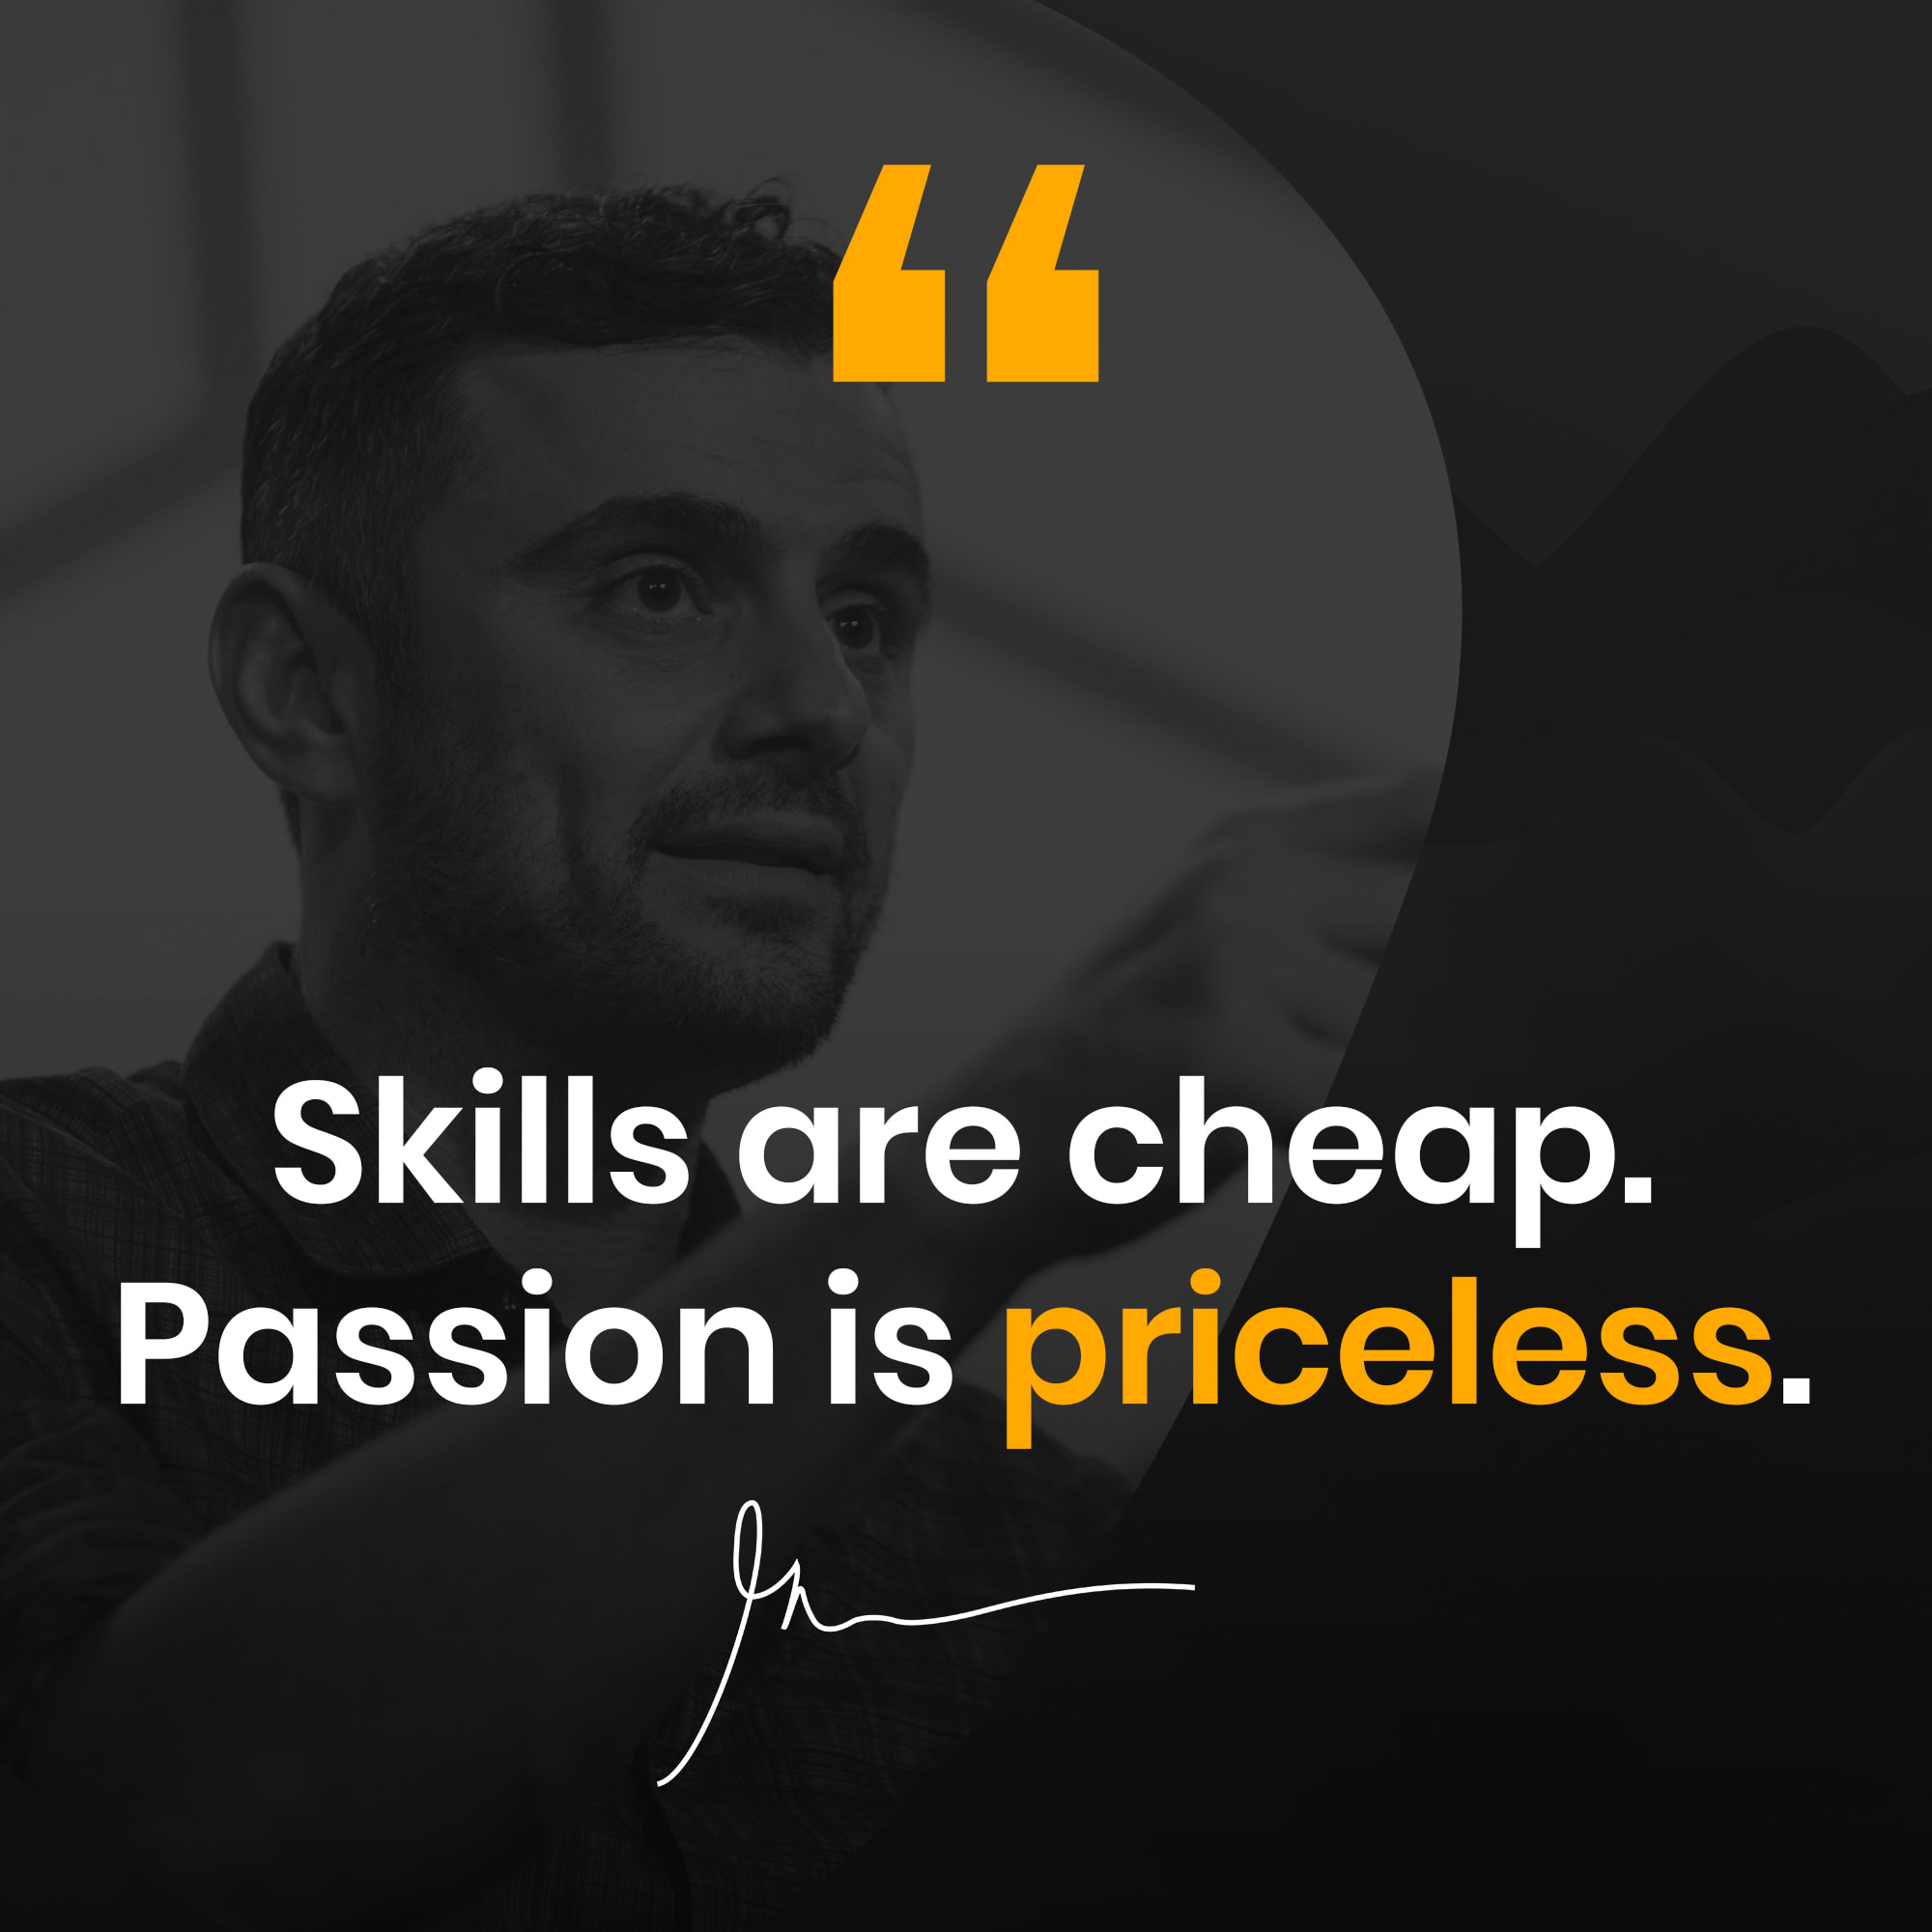 Skills are cheap. Passion is priceless. 💪